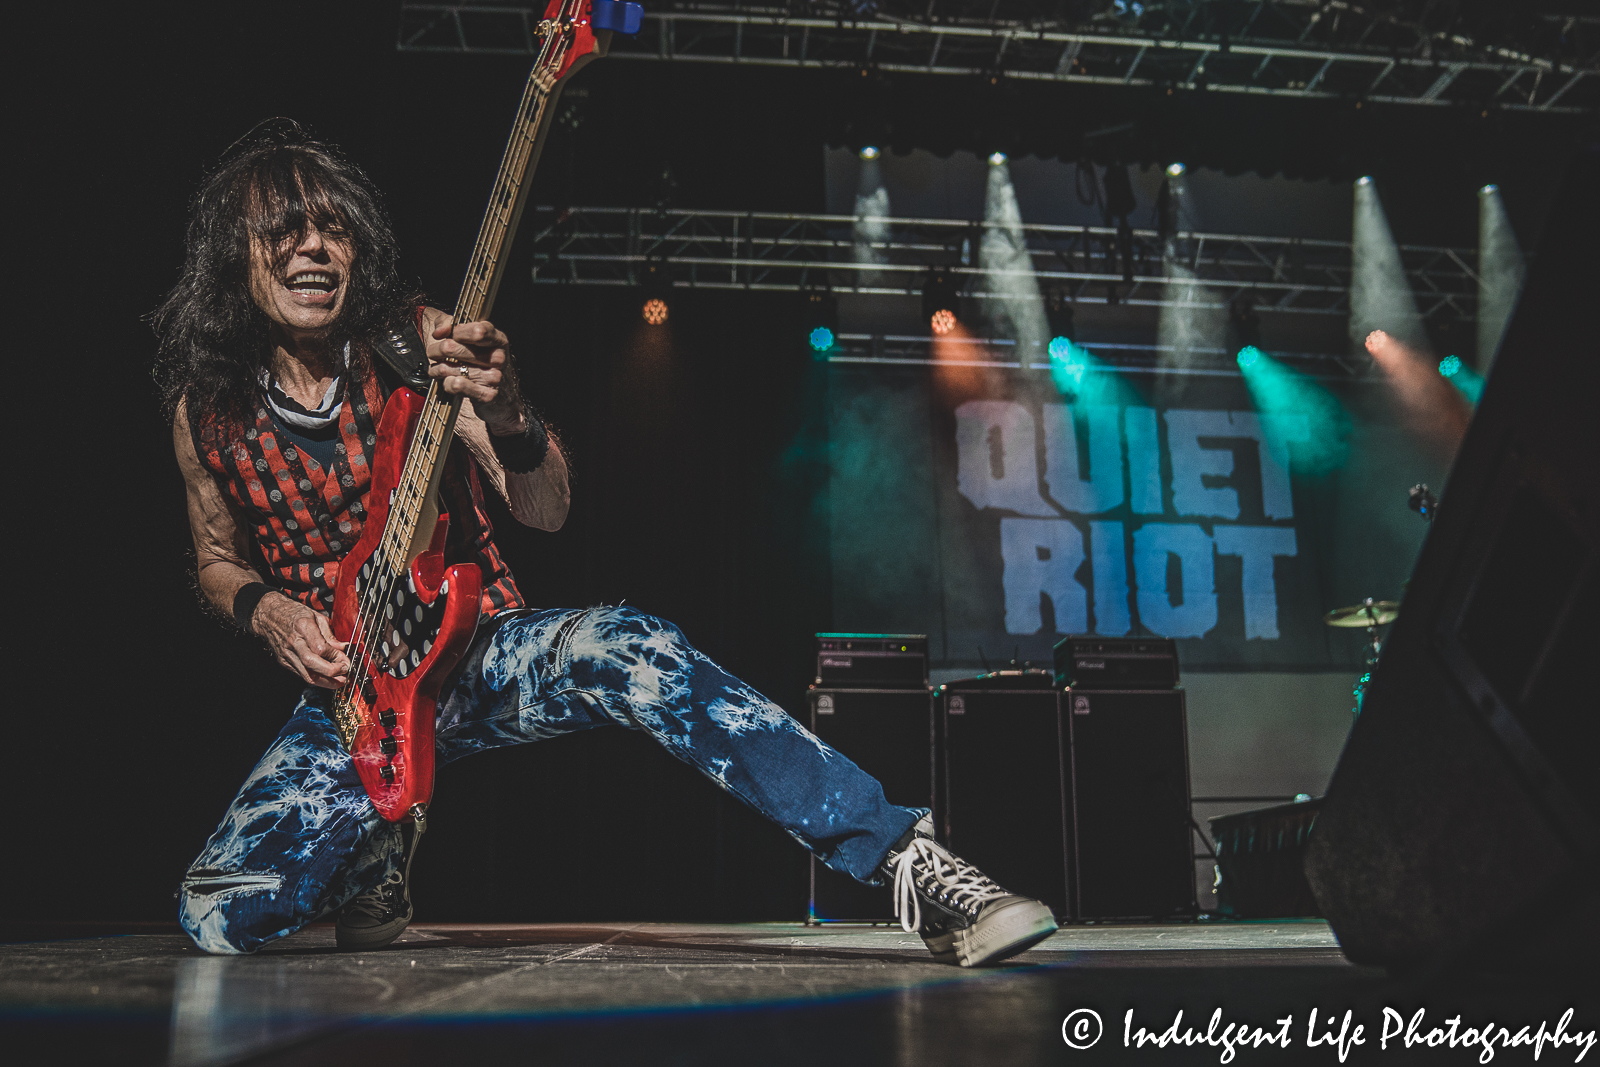 Quiet Riot bass guitar player Rudy Sarzo live in concert at Star Pavilion inside of Ameristar Casino in Kansas City, MO on July 29, 2022.